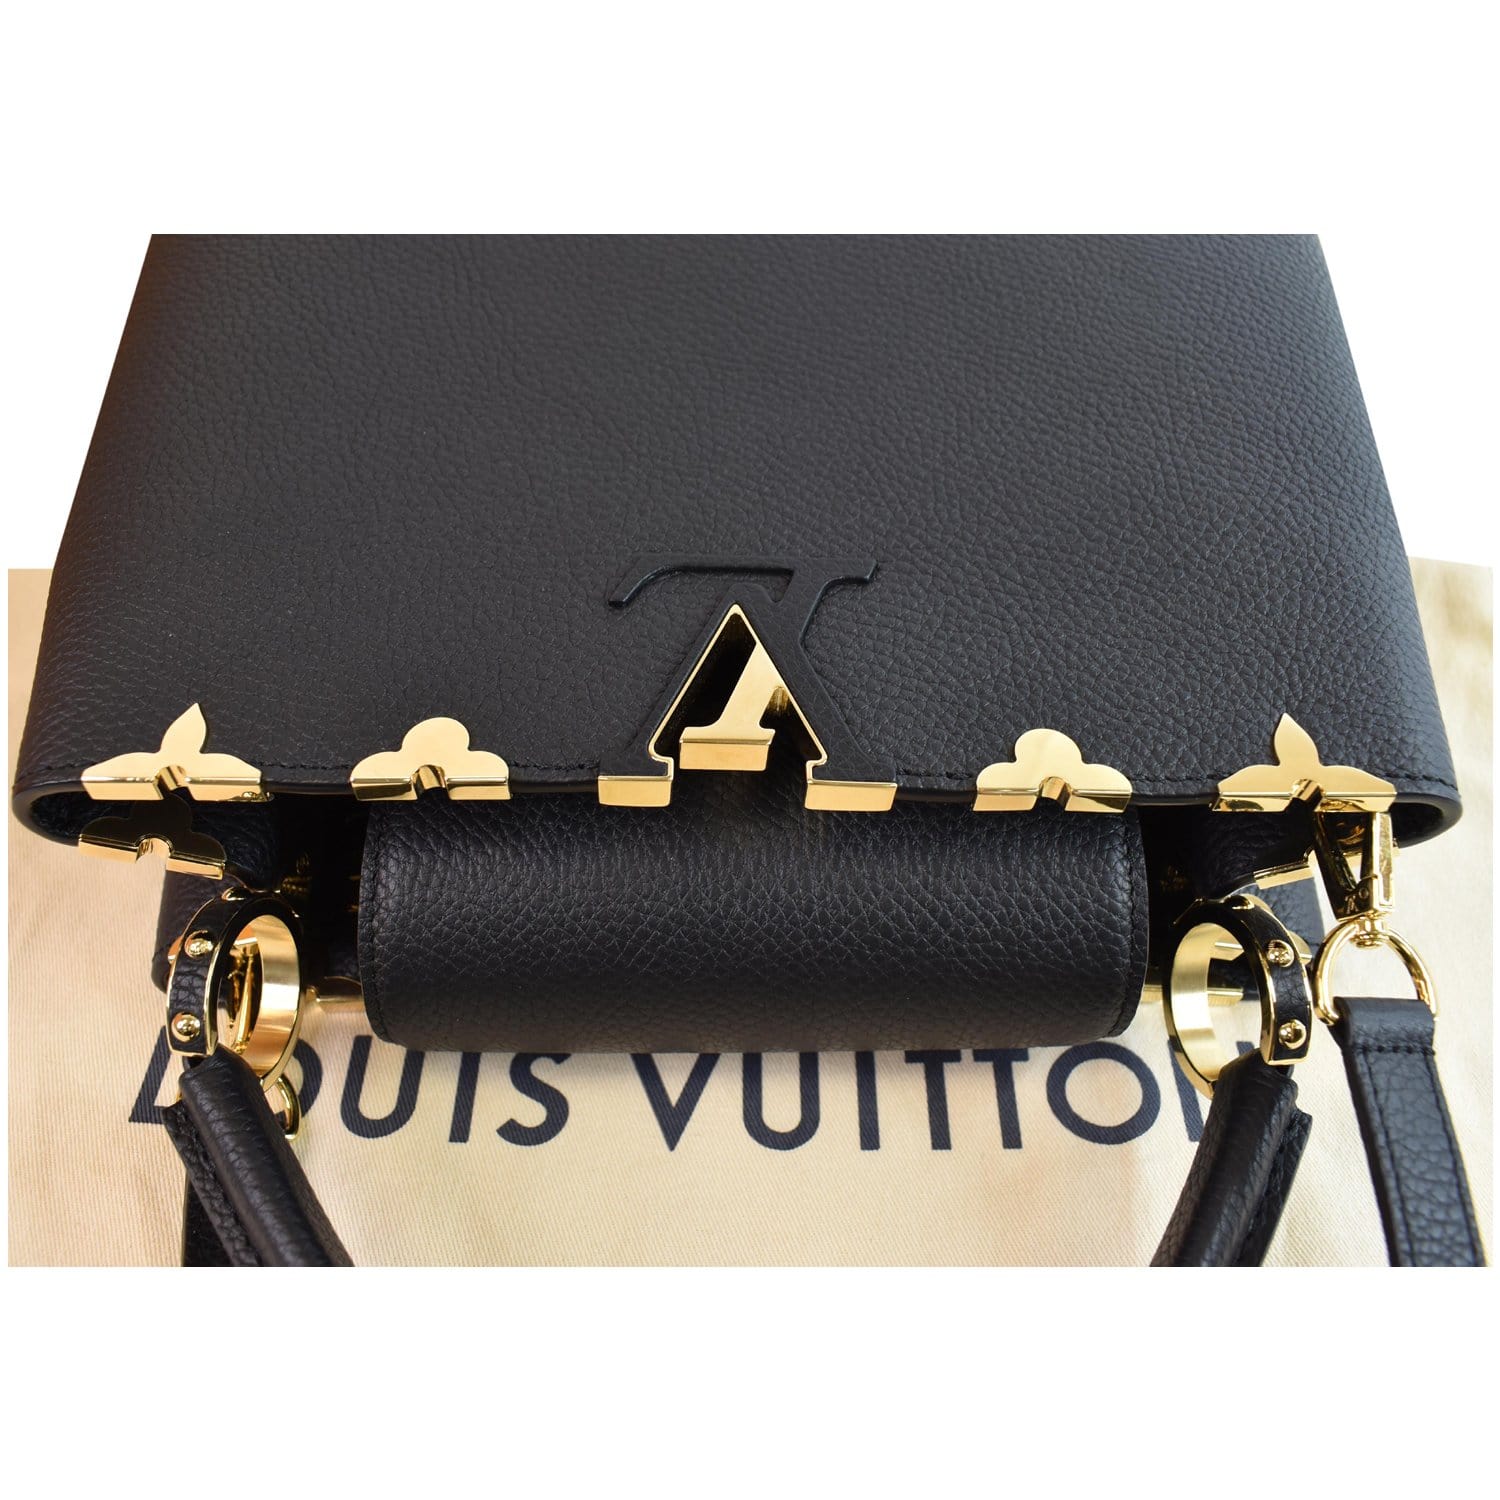 limited edition lv capucines